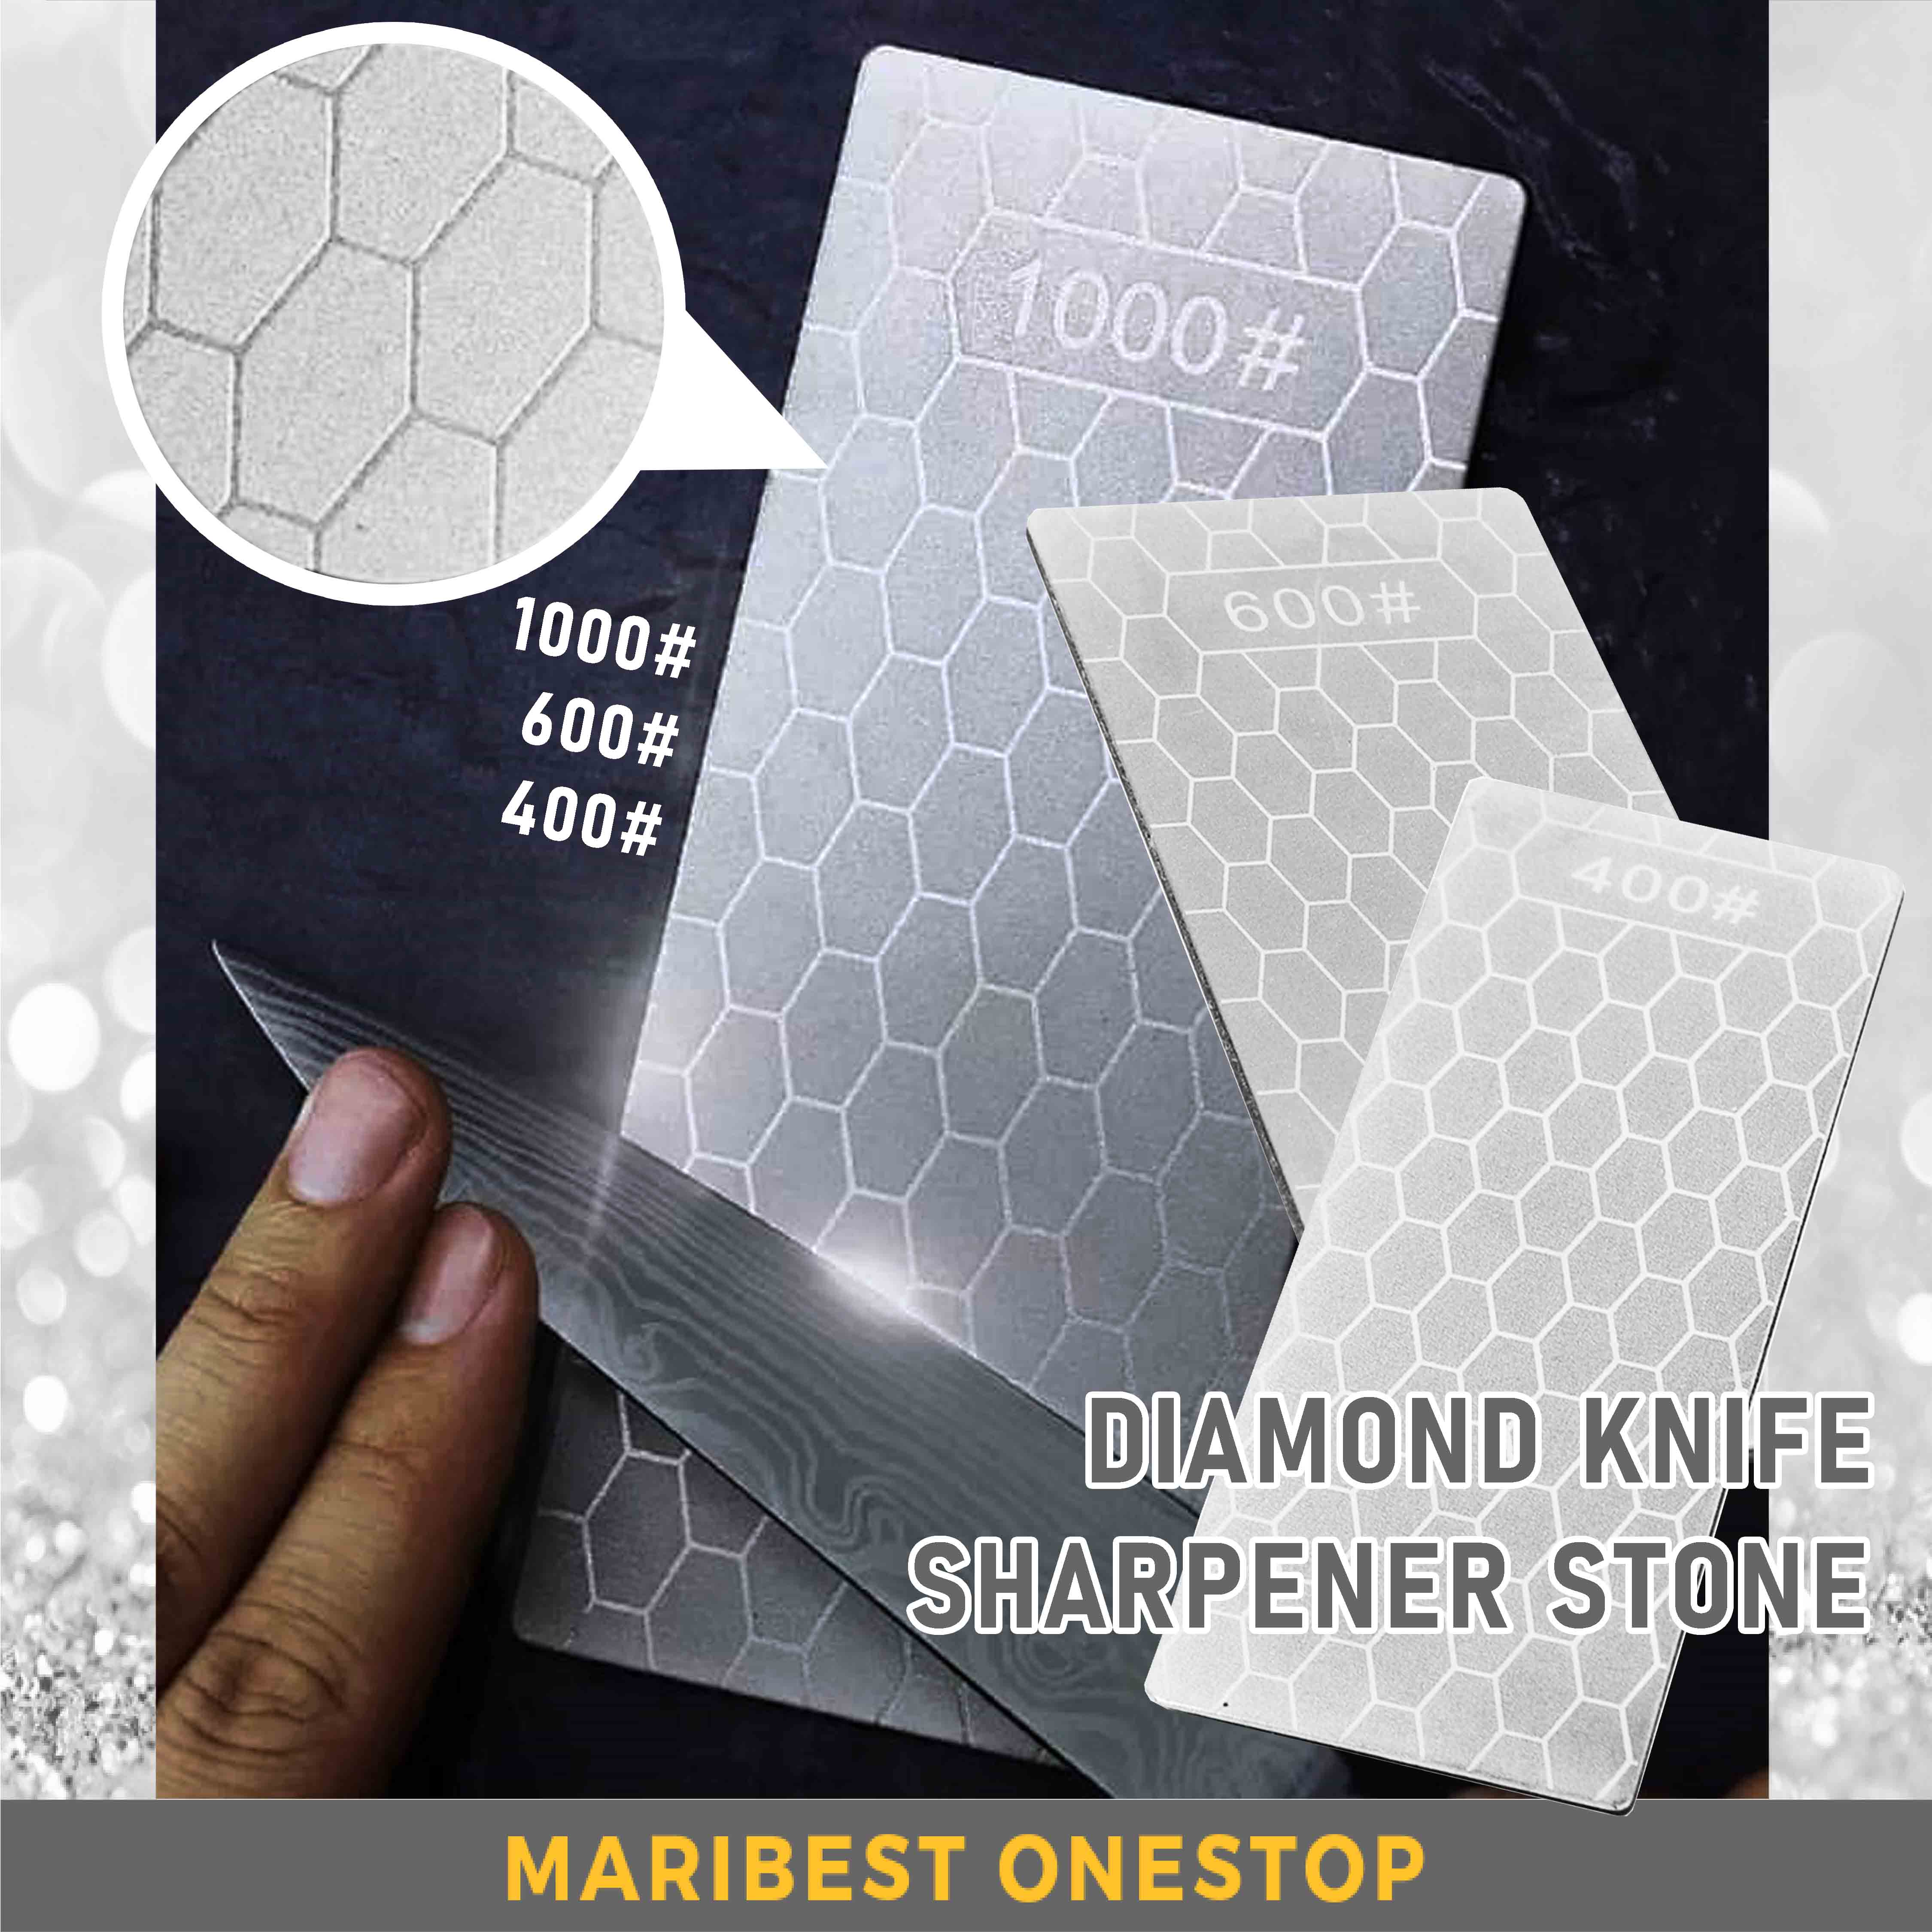 DIAMOND KNIFE SHARPENING STONE 400# 600# 1000# ULTRA-THIN HONEYCOMB SURFACE WHETSTONE FOR KNIFE WIDE APPLICABLE